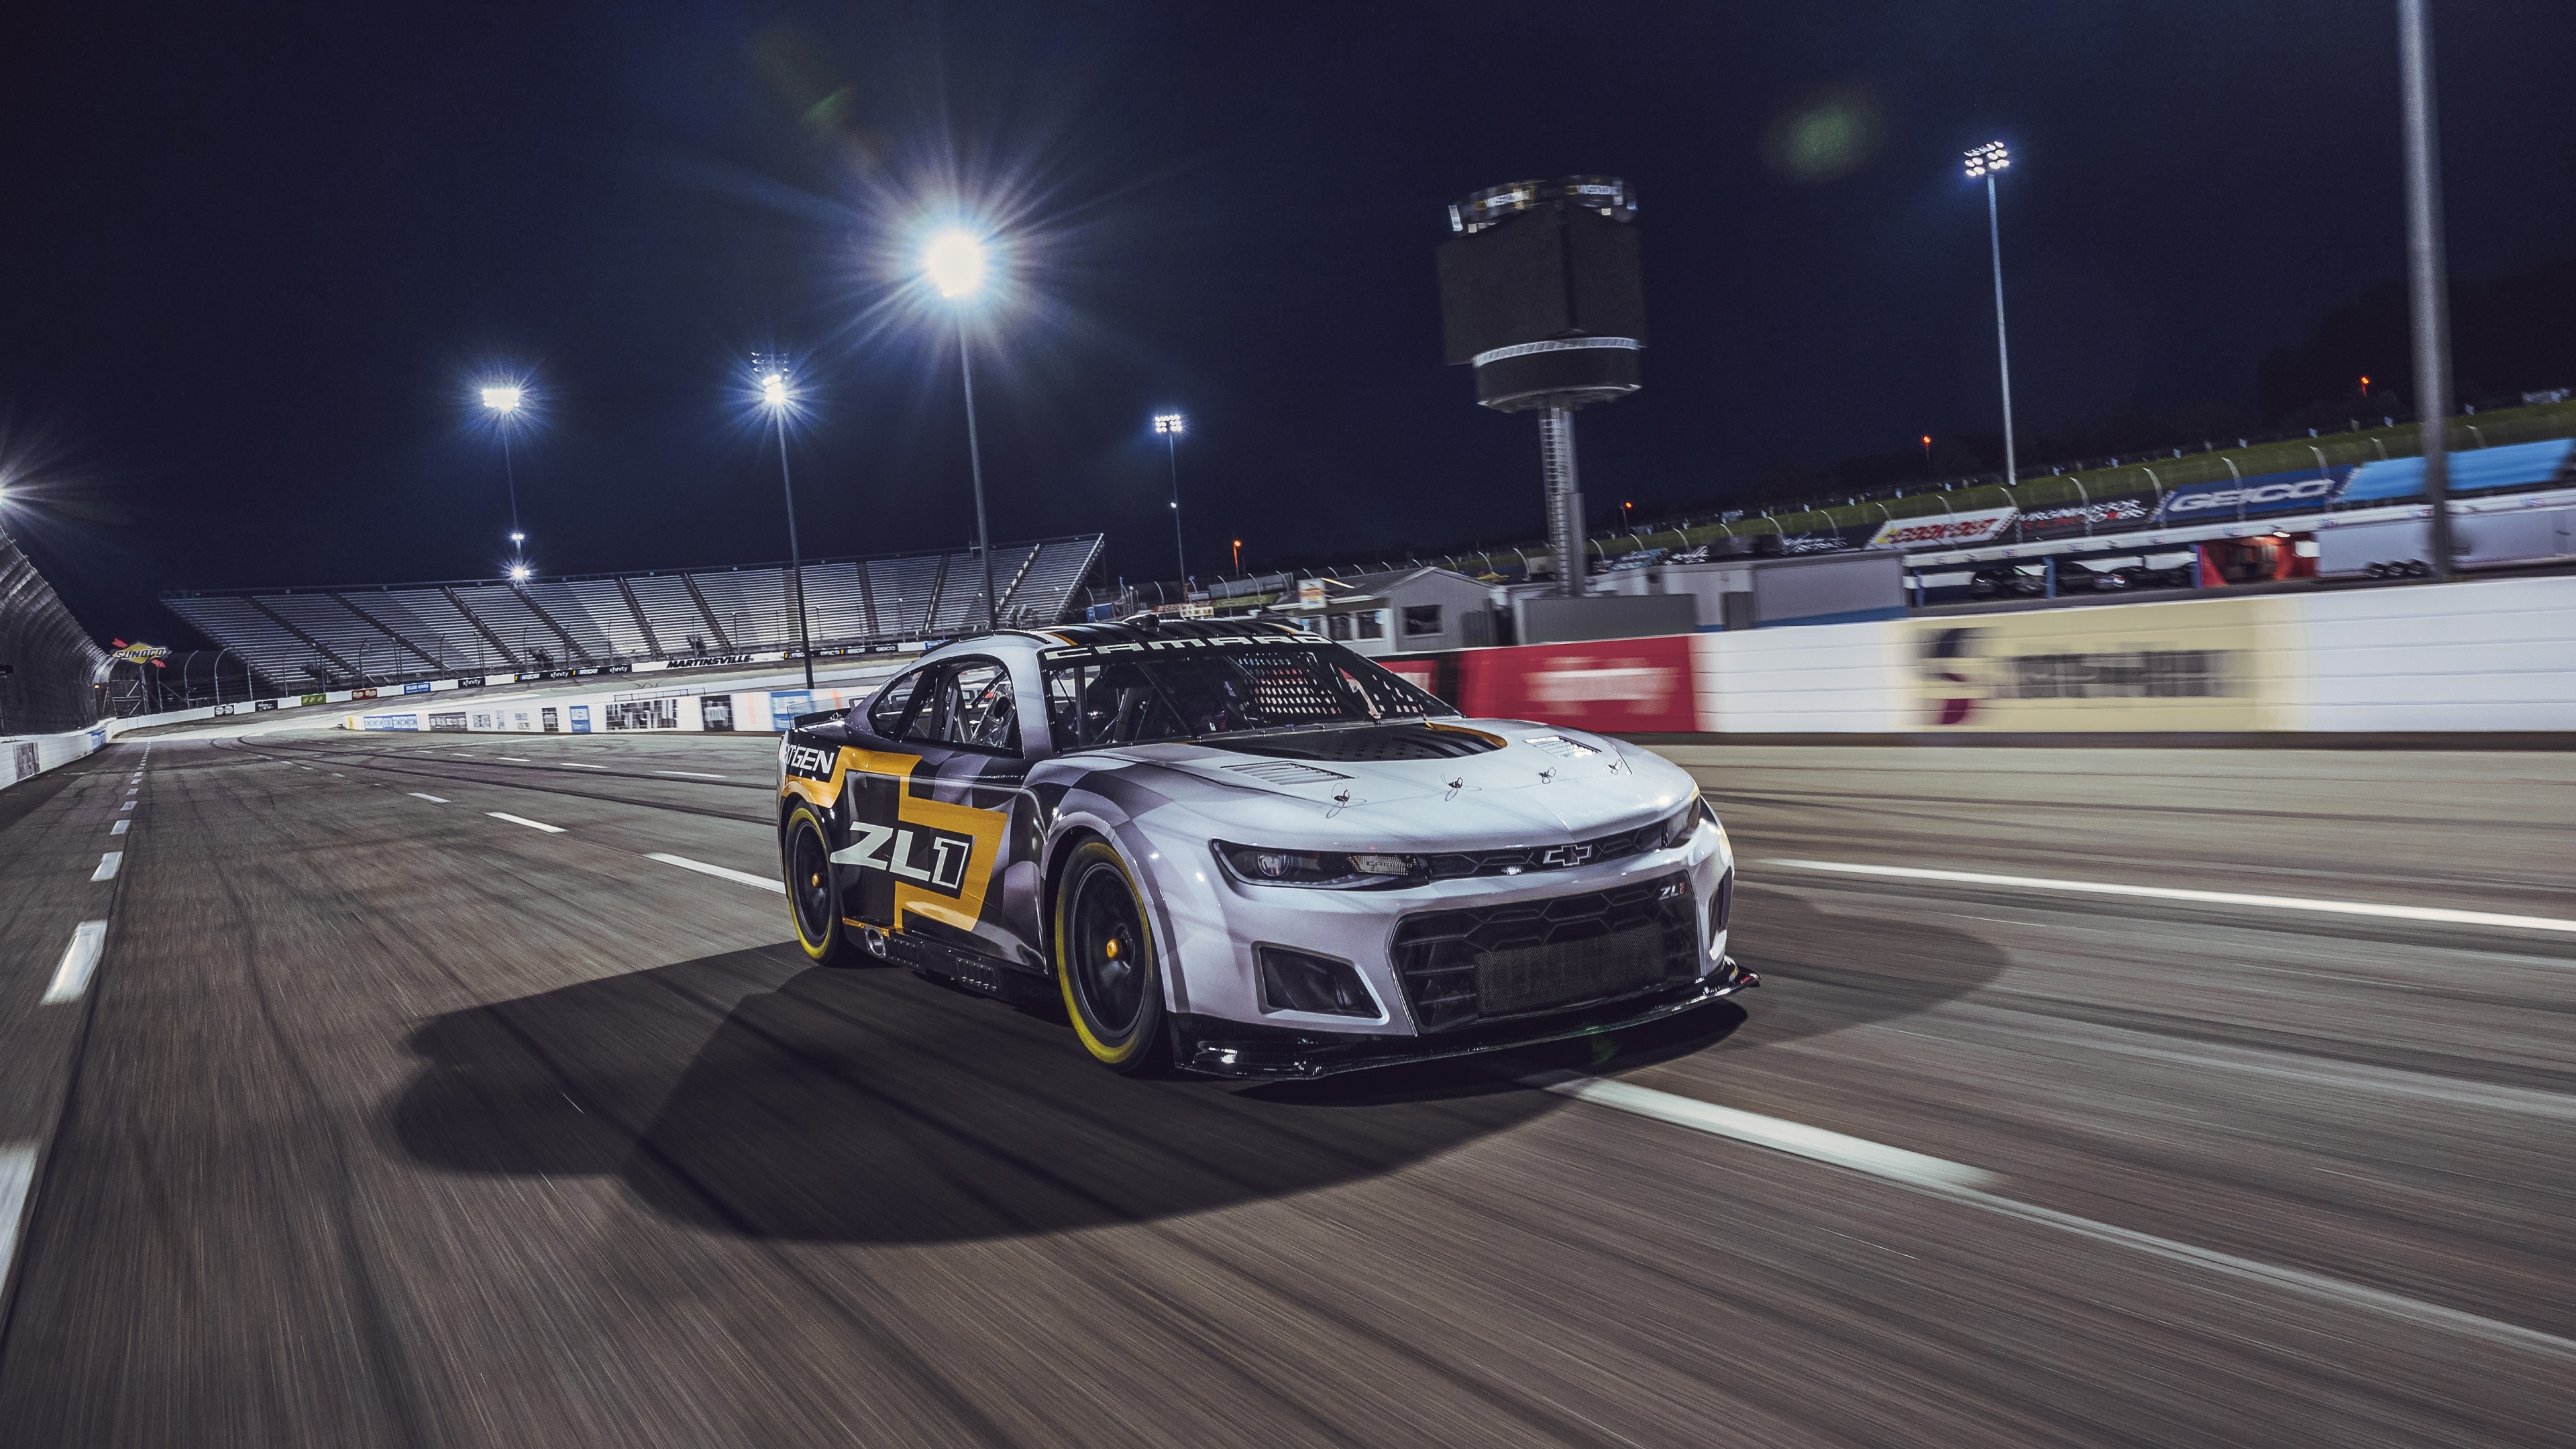 Camaro ZL1 and Nascar, High-performance partnership, Speed and power, Racing excitement, Dynamic wallpapers, 3840x2160 4K Desktop